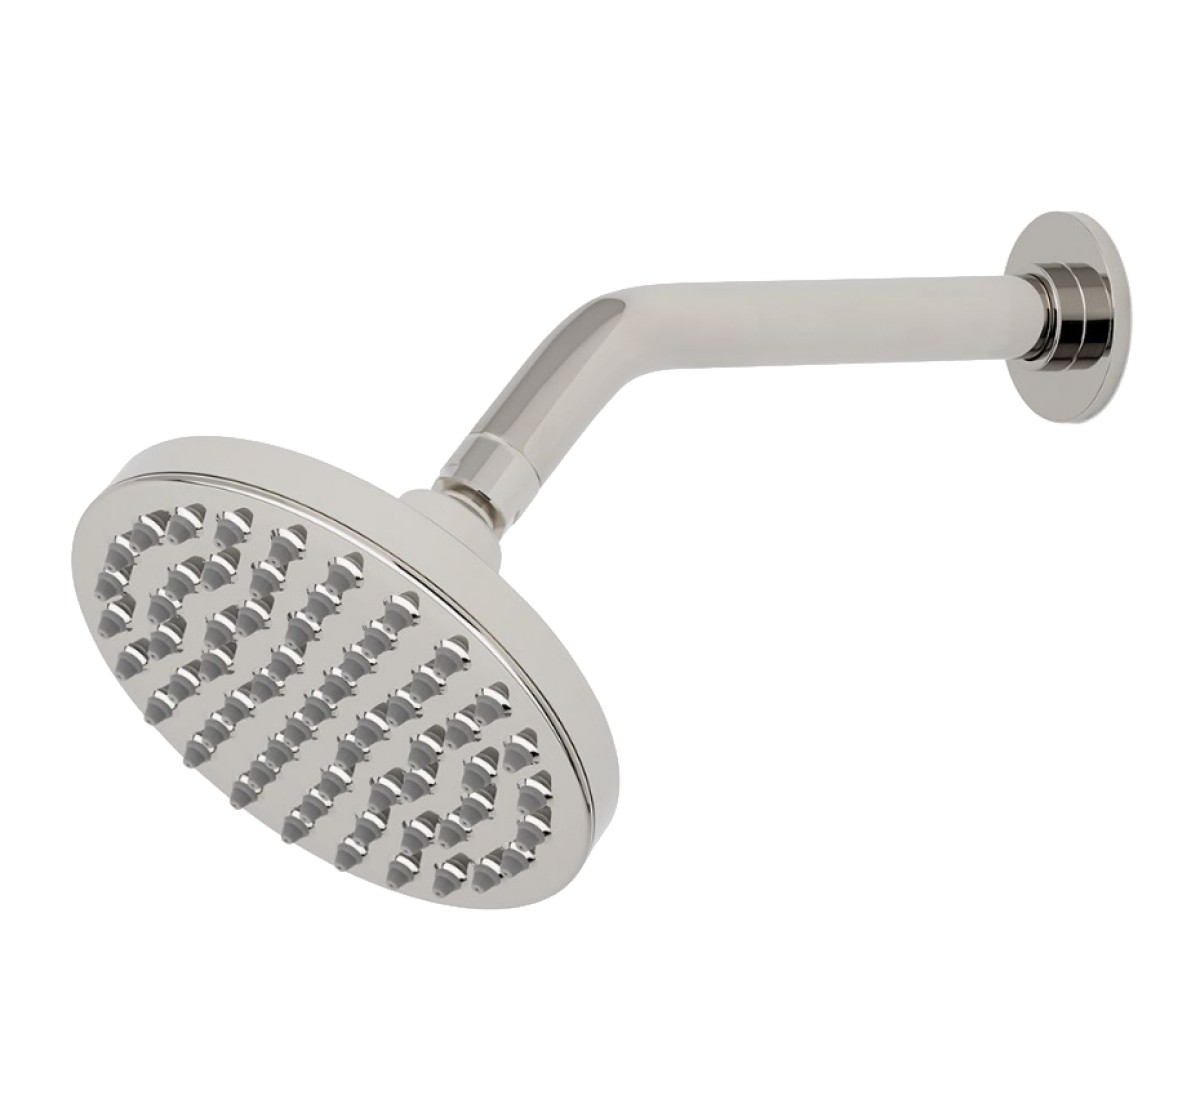 Flyte 6" Showerhead with 8" Wall Mounted 45 Degree Shower Arm | Highlight image